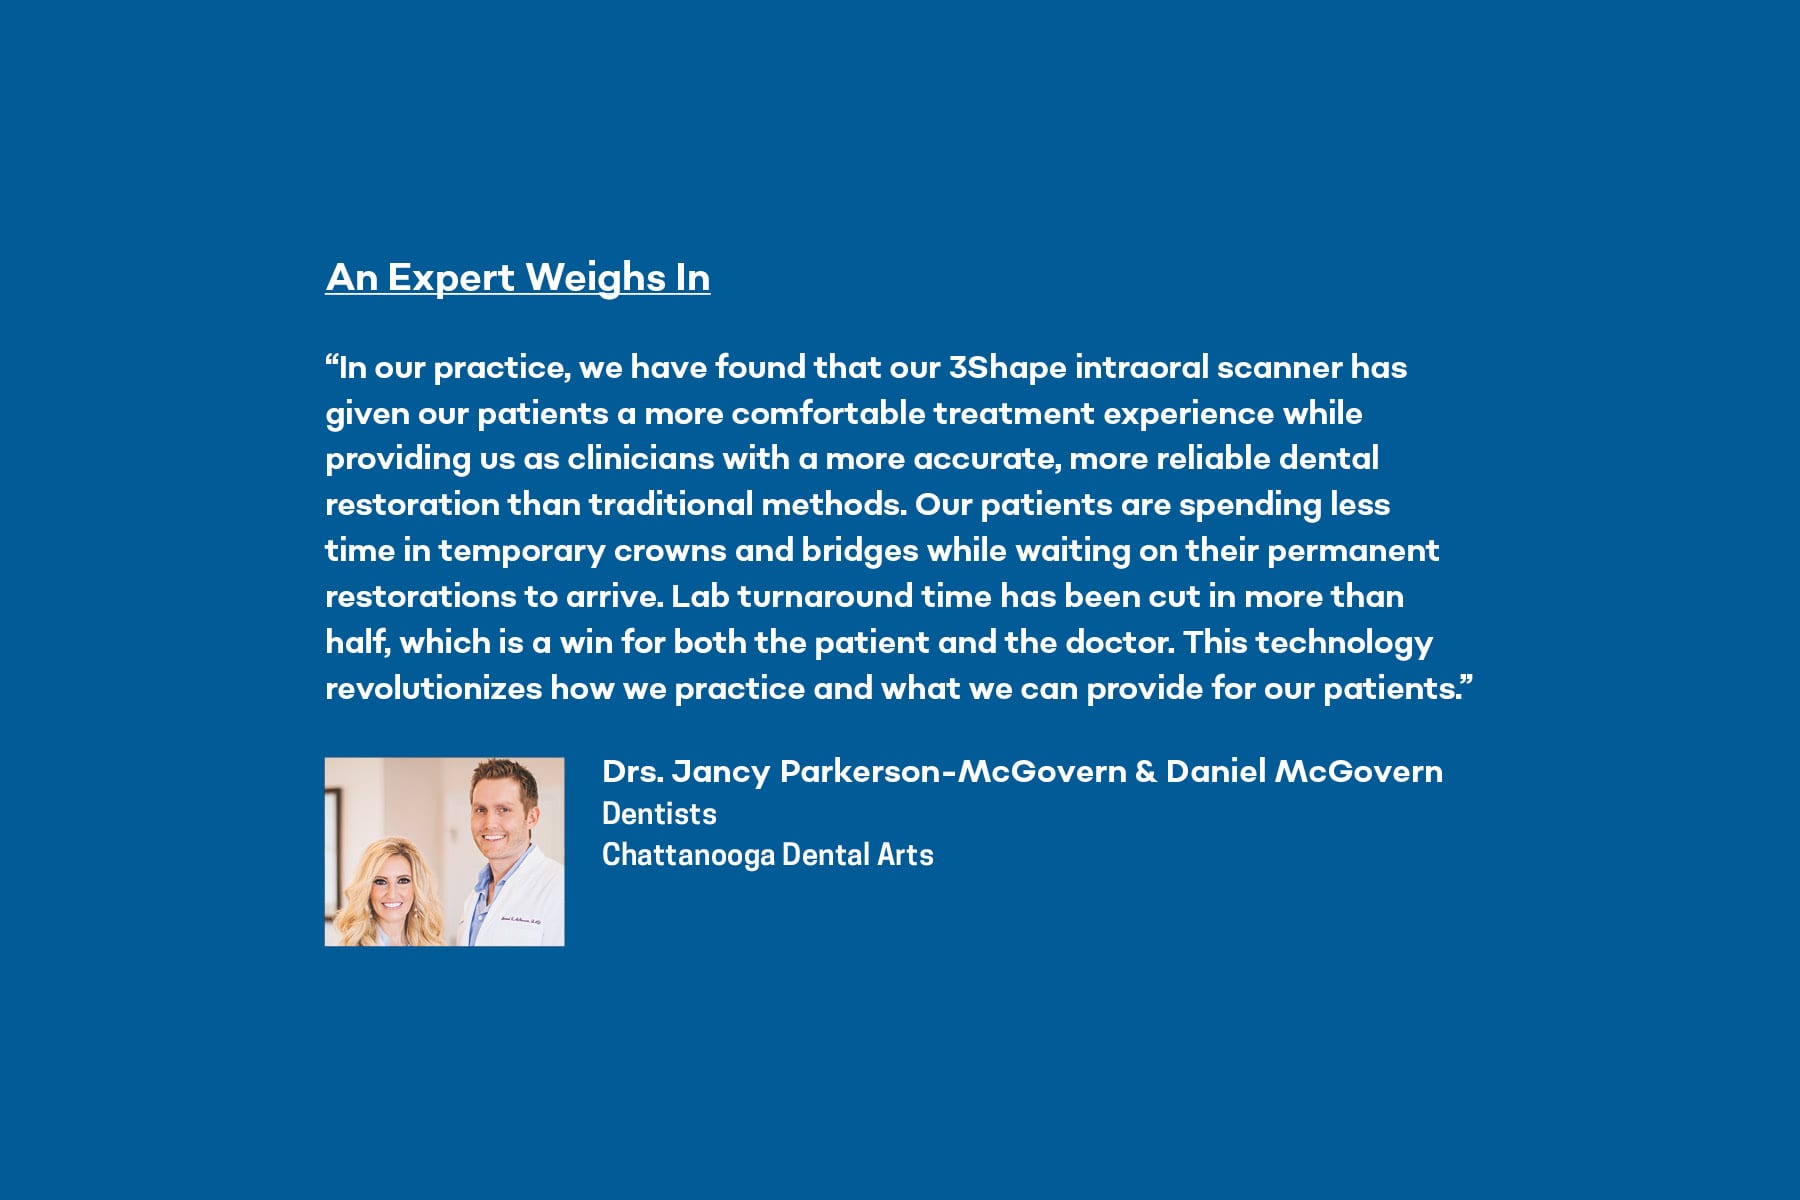 Drs. Jancy Parkerson-McGovern and Daniel McGovern share their expert opinions on the 3Shape intraoral scanner